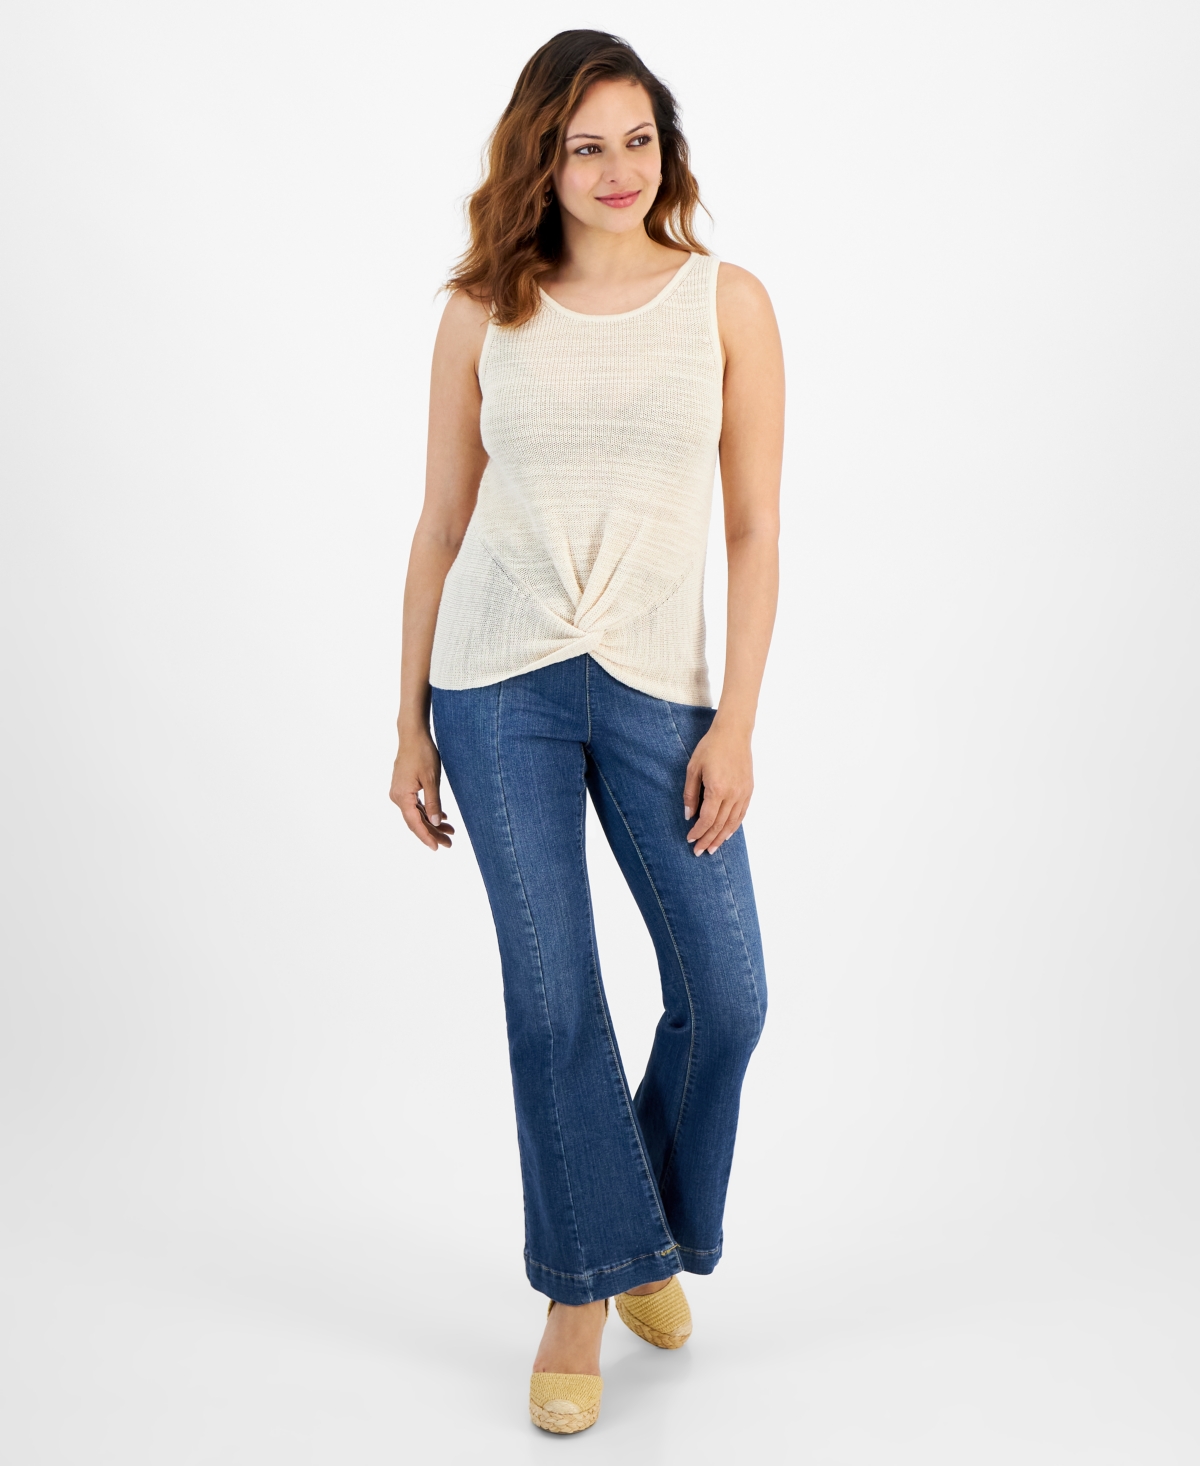 Petite Twist-Front Sweater Tank Top, Created for Macy's - Brazilian Sand